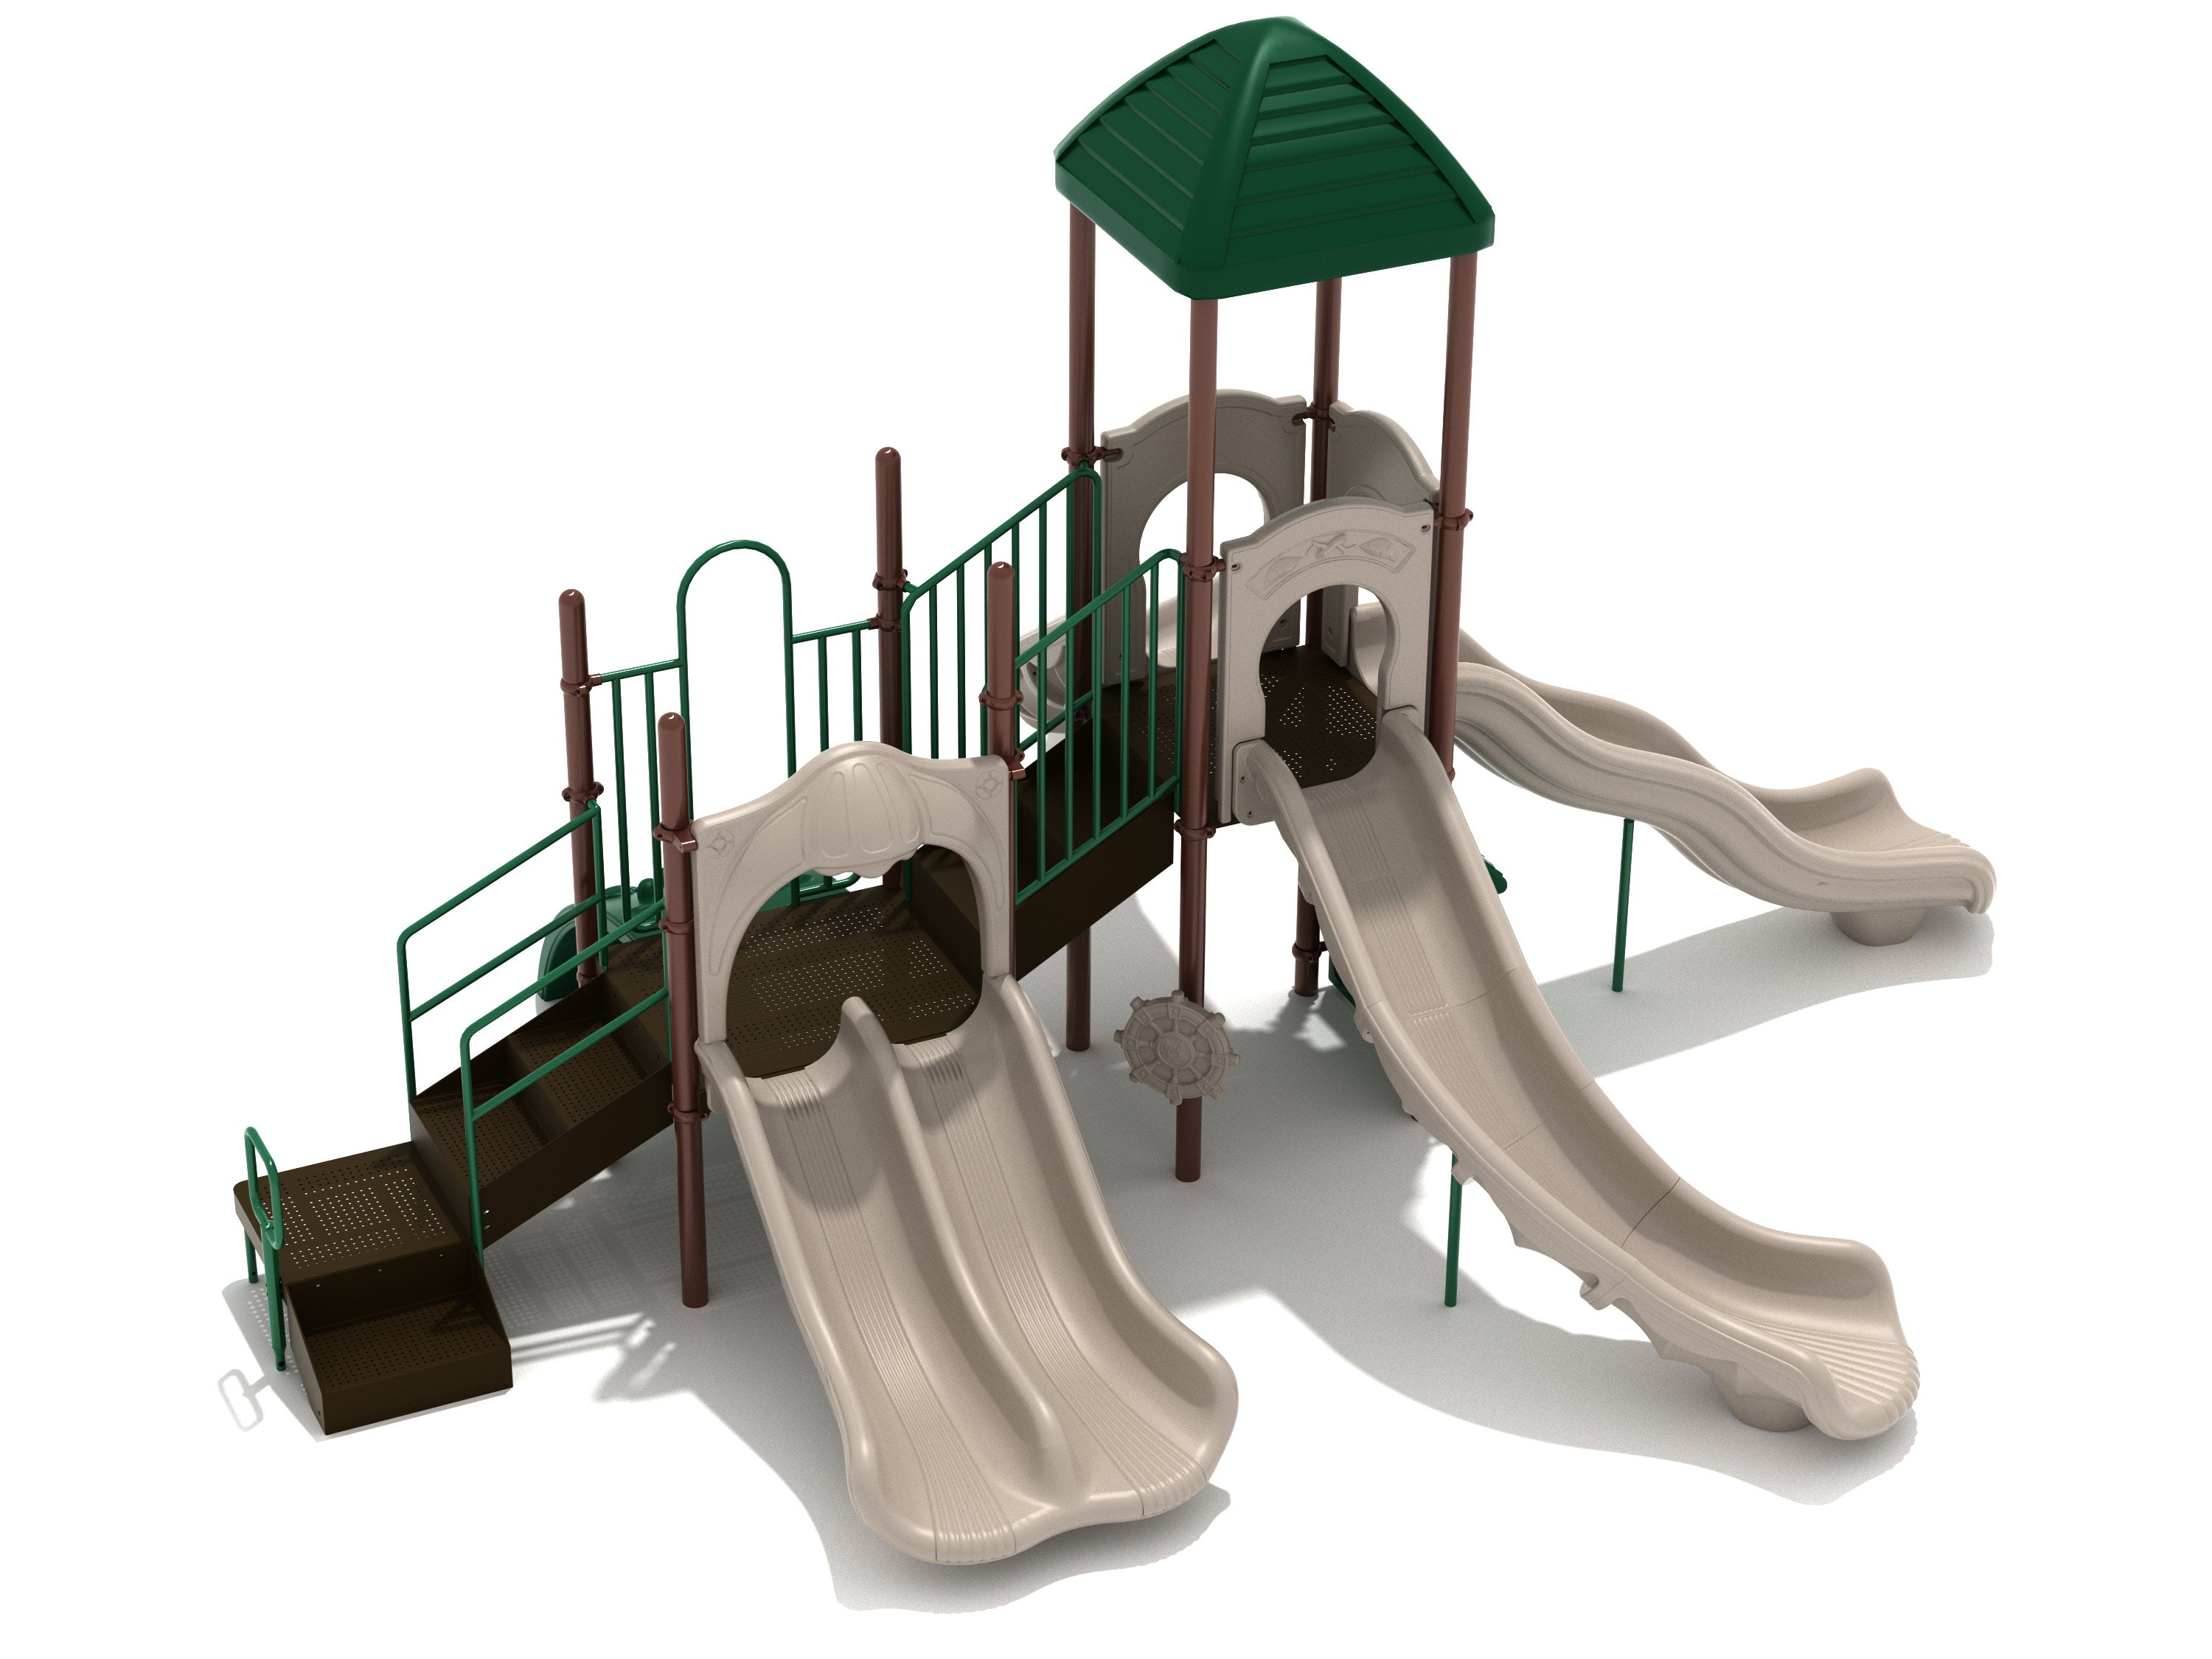 Divinity Hill Play System Neutral Colors